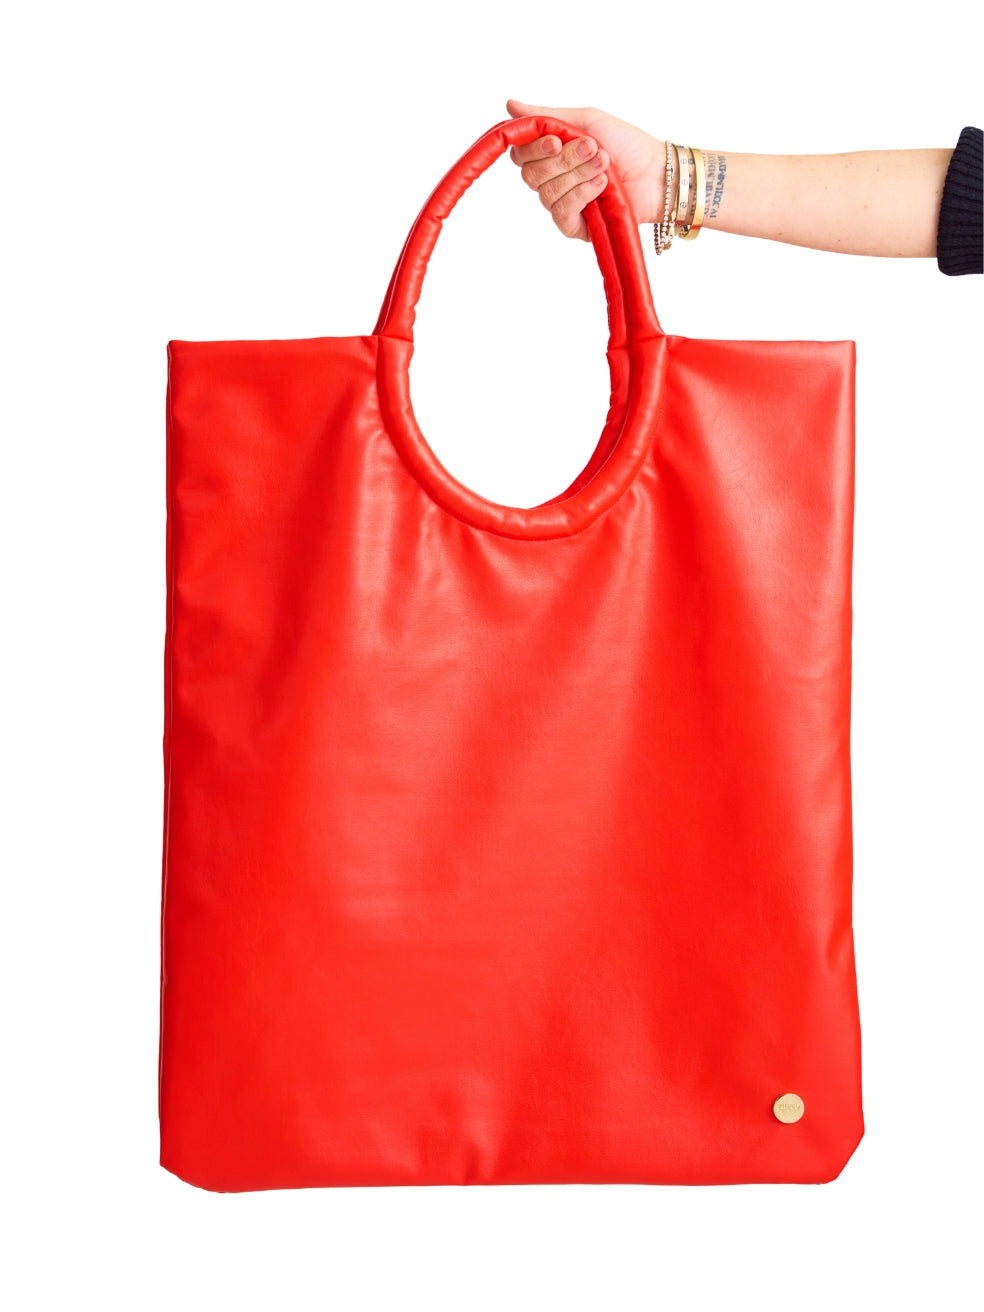 24 Hour Tote Bright Red Tart Faux Leather Oversized Tote FREED Made in Canada